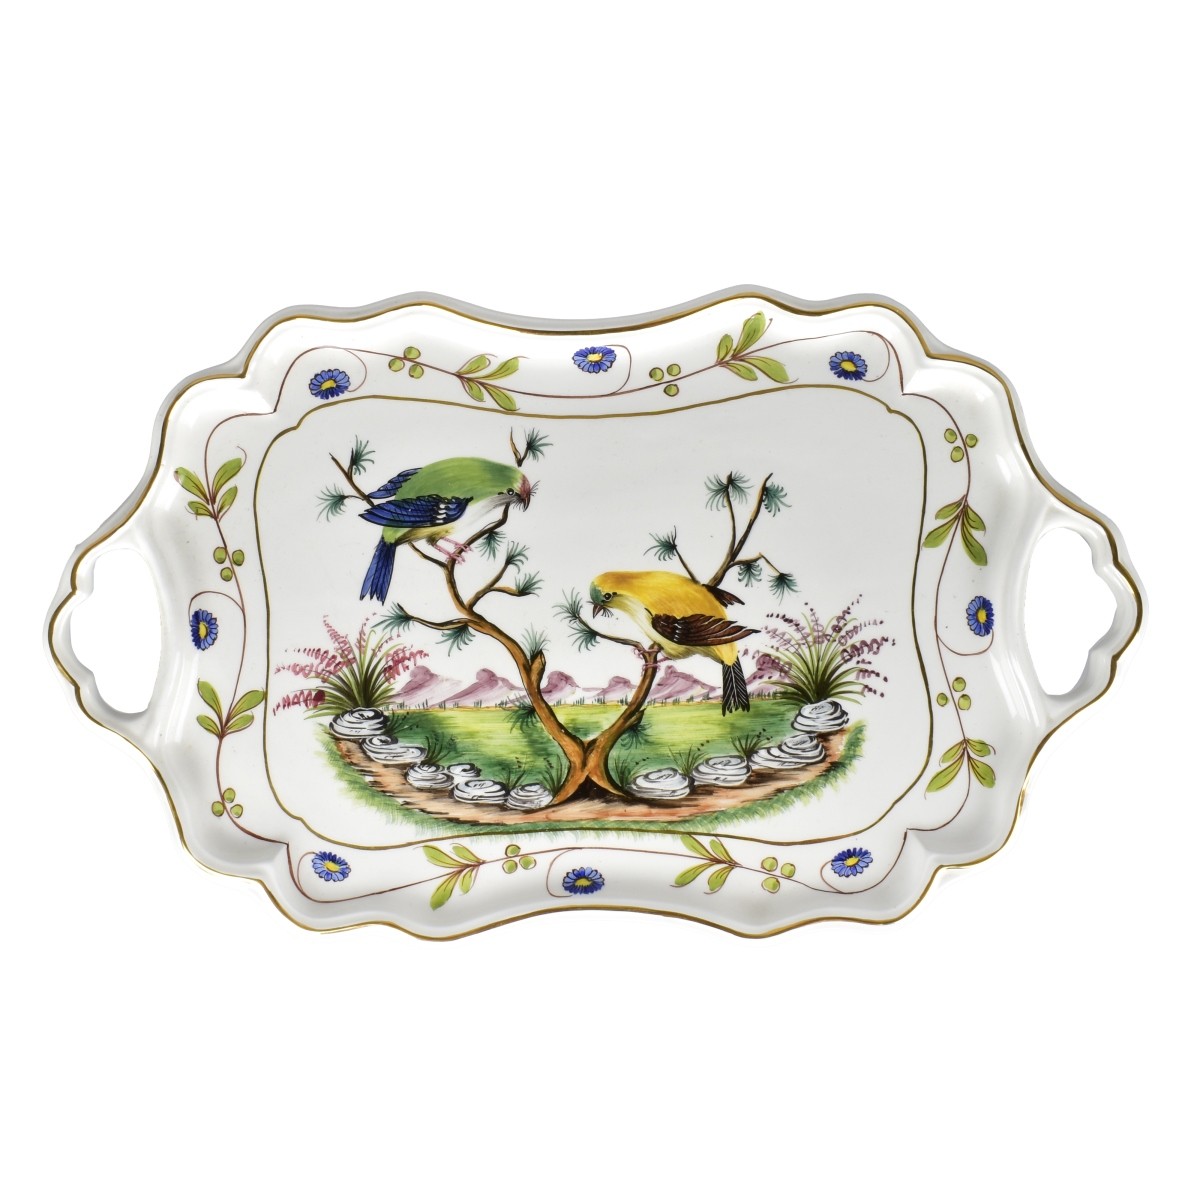 Tiffany & Co. Porcelain Tray and Cachepot